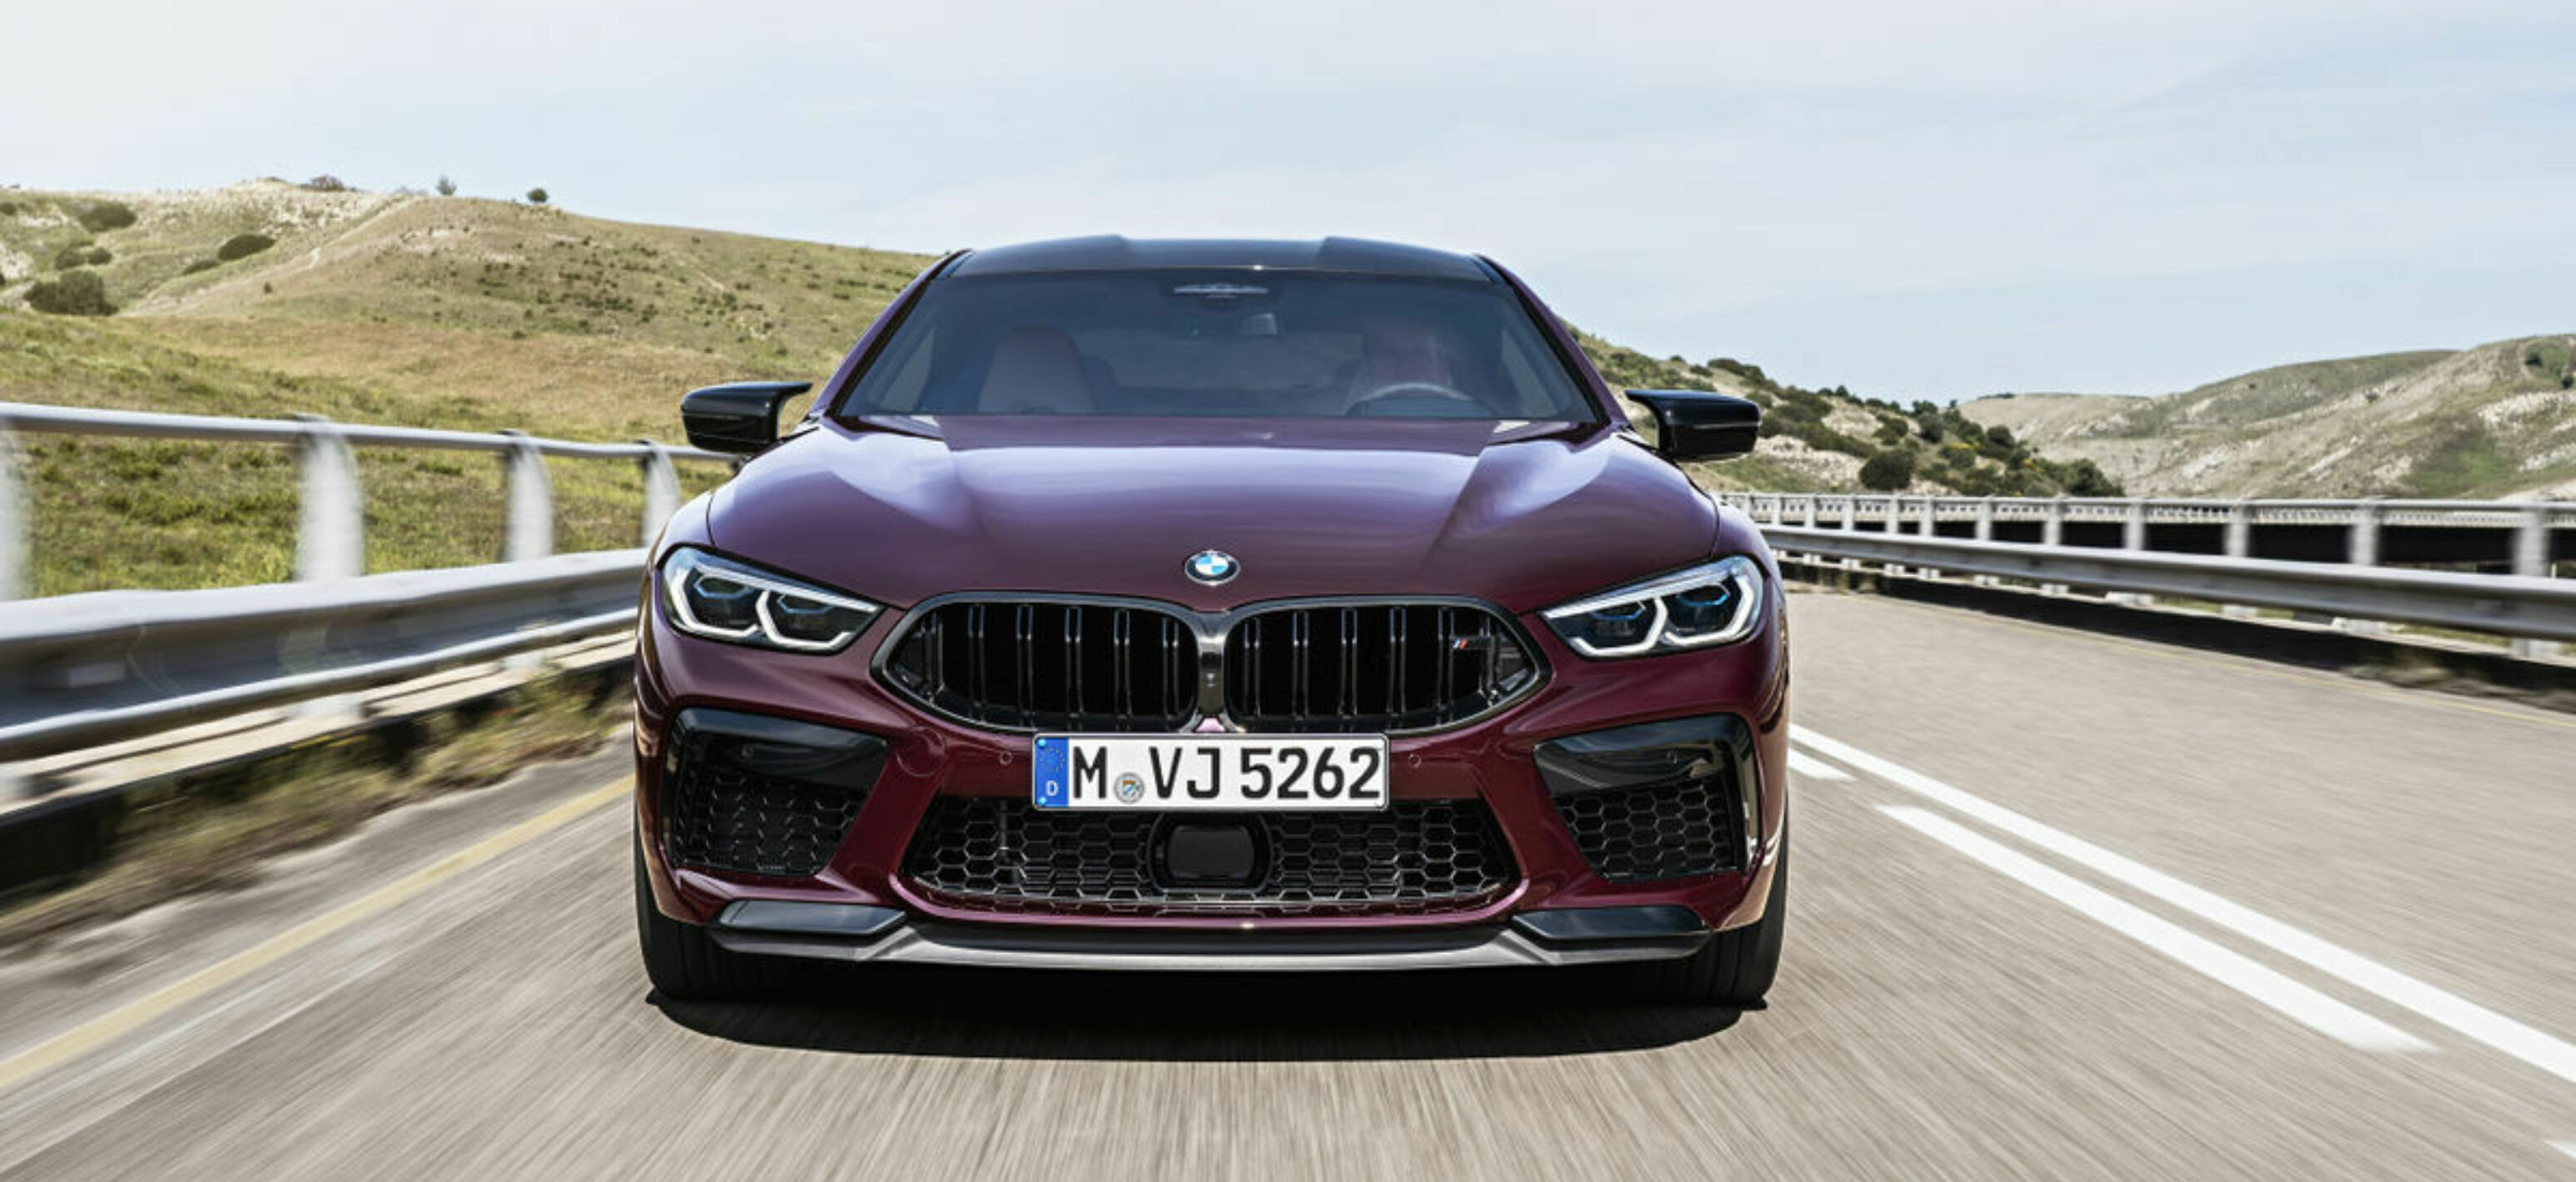 https://autofilter.sk/assets/images/rad-8-gran-coupe-2/gallery/p90369598-high-res-the-new-bmw-m8-gran-galeria.jpg - obrazok